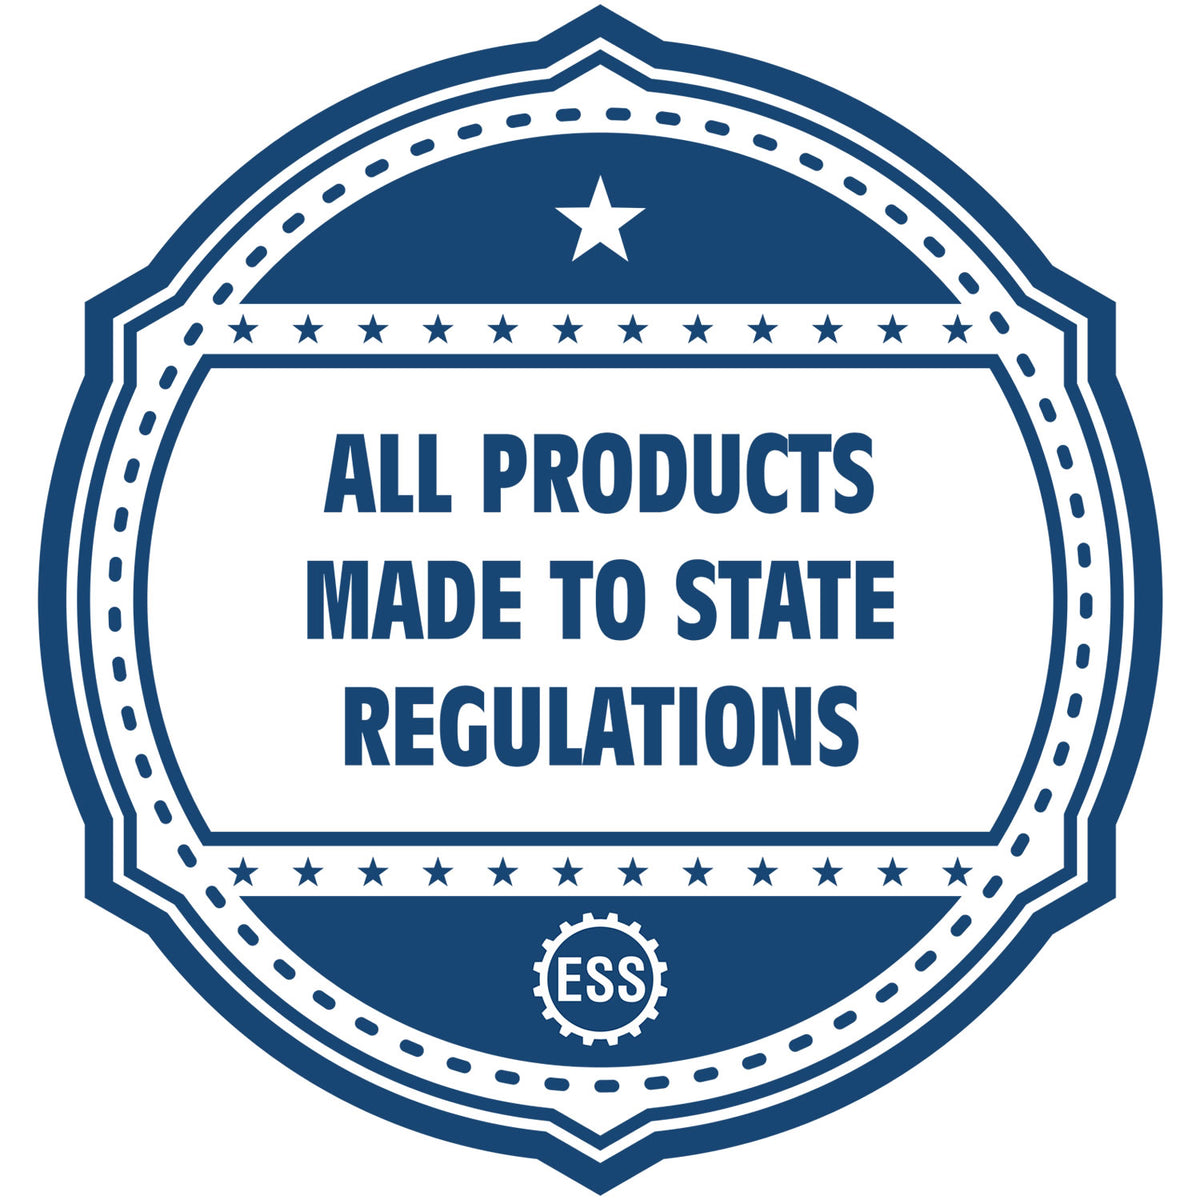 A blue icon or badge for the Hybrid Missouri Architect Seal showing that this product is made in compliance with state regulations.